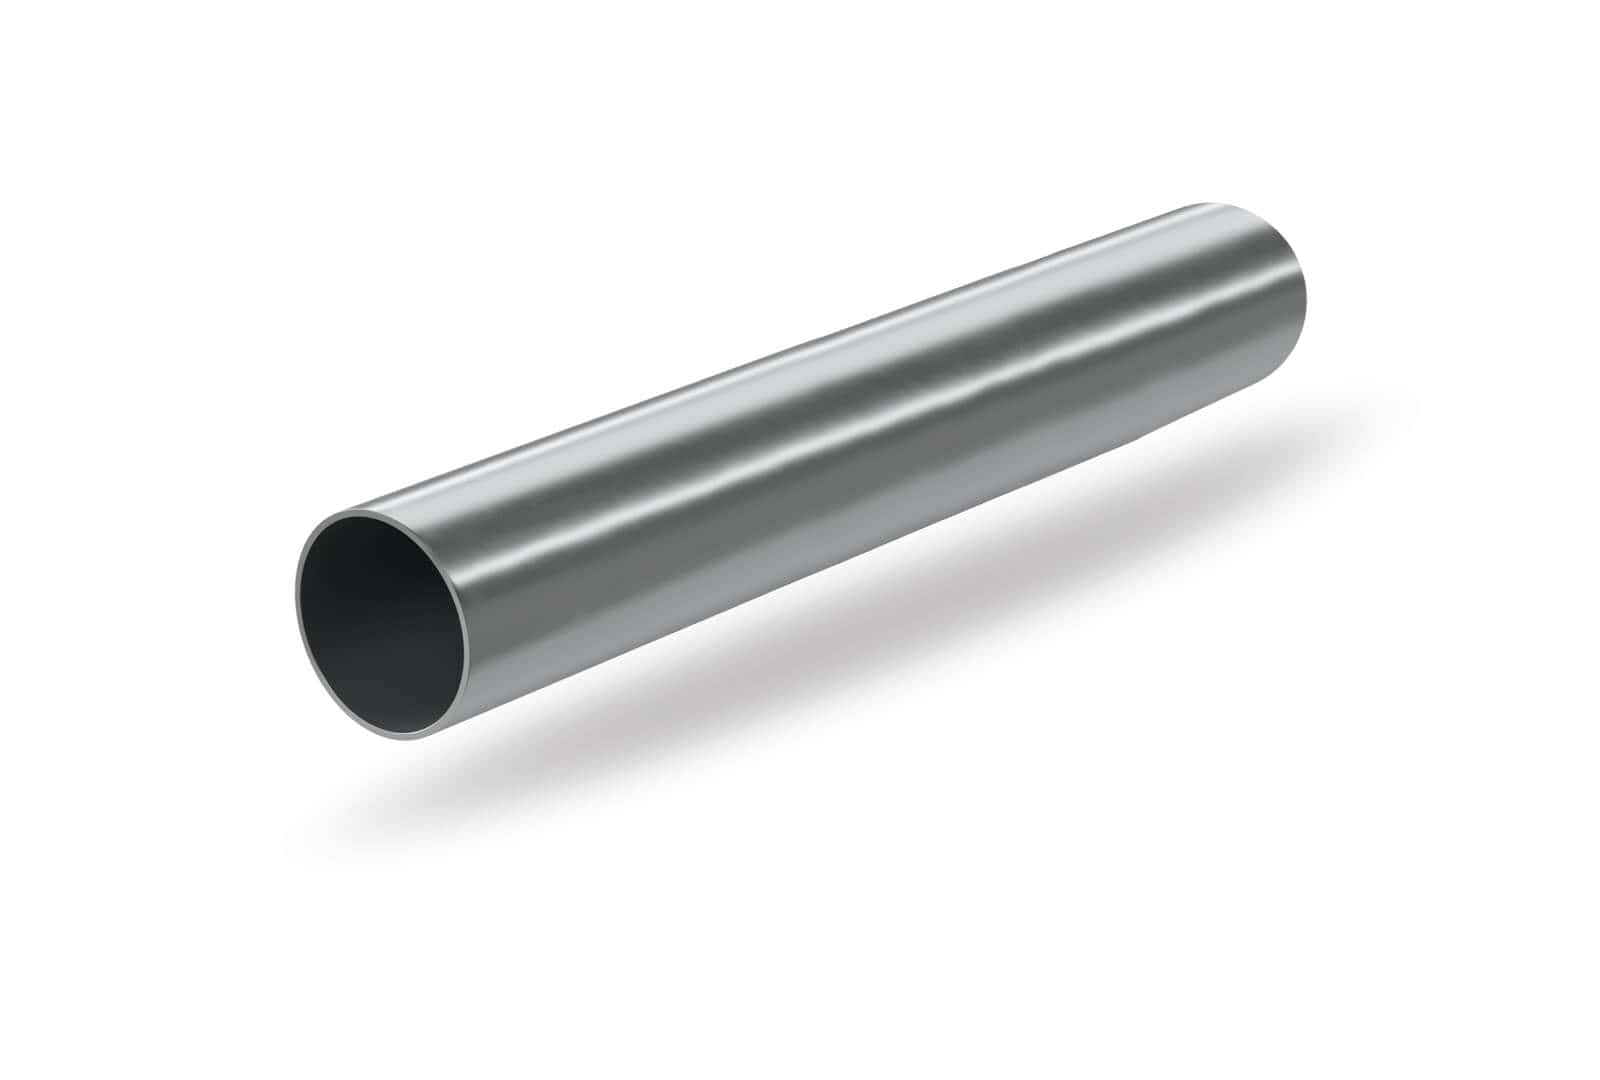 KAN-therm - Inox system - Stainless steel pipes with diameters 12 - 168.3 mm and 15-108 mm